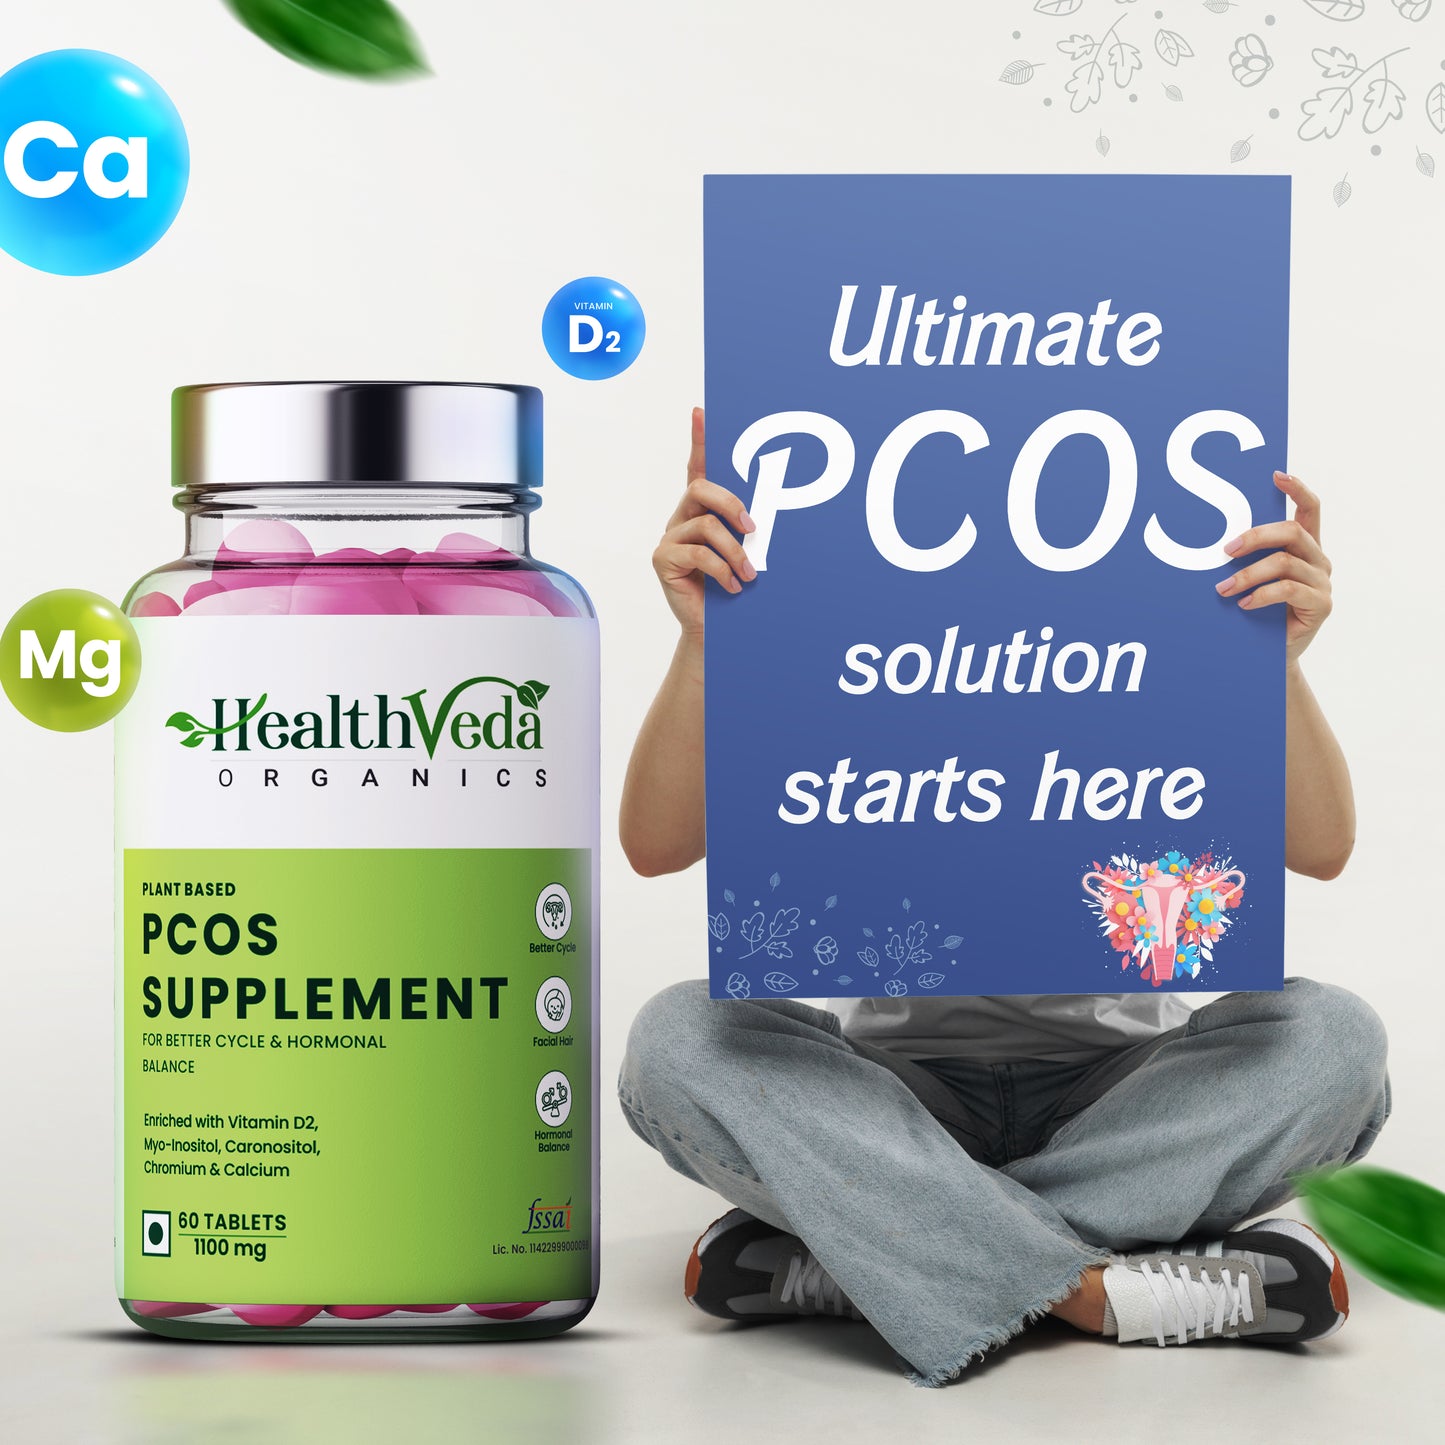 Health Veda Organics PCOS Supplement 1100 mg | Regularize Menstrual Cycle, Balance Hormonal Levels, Reduces Acne | 60 Veg Tablets for Women